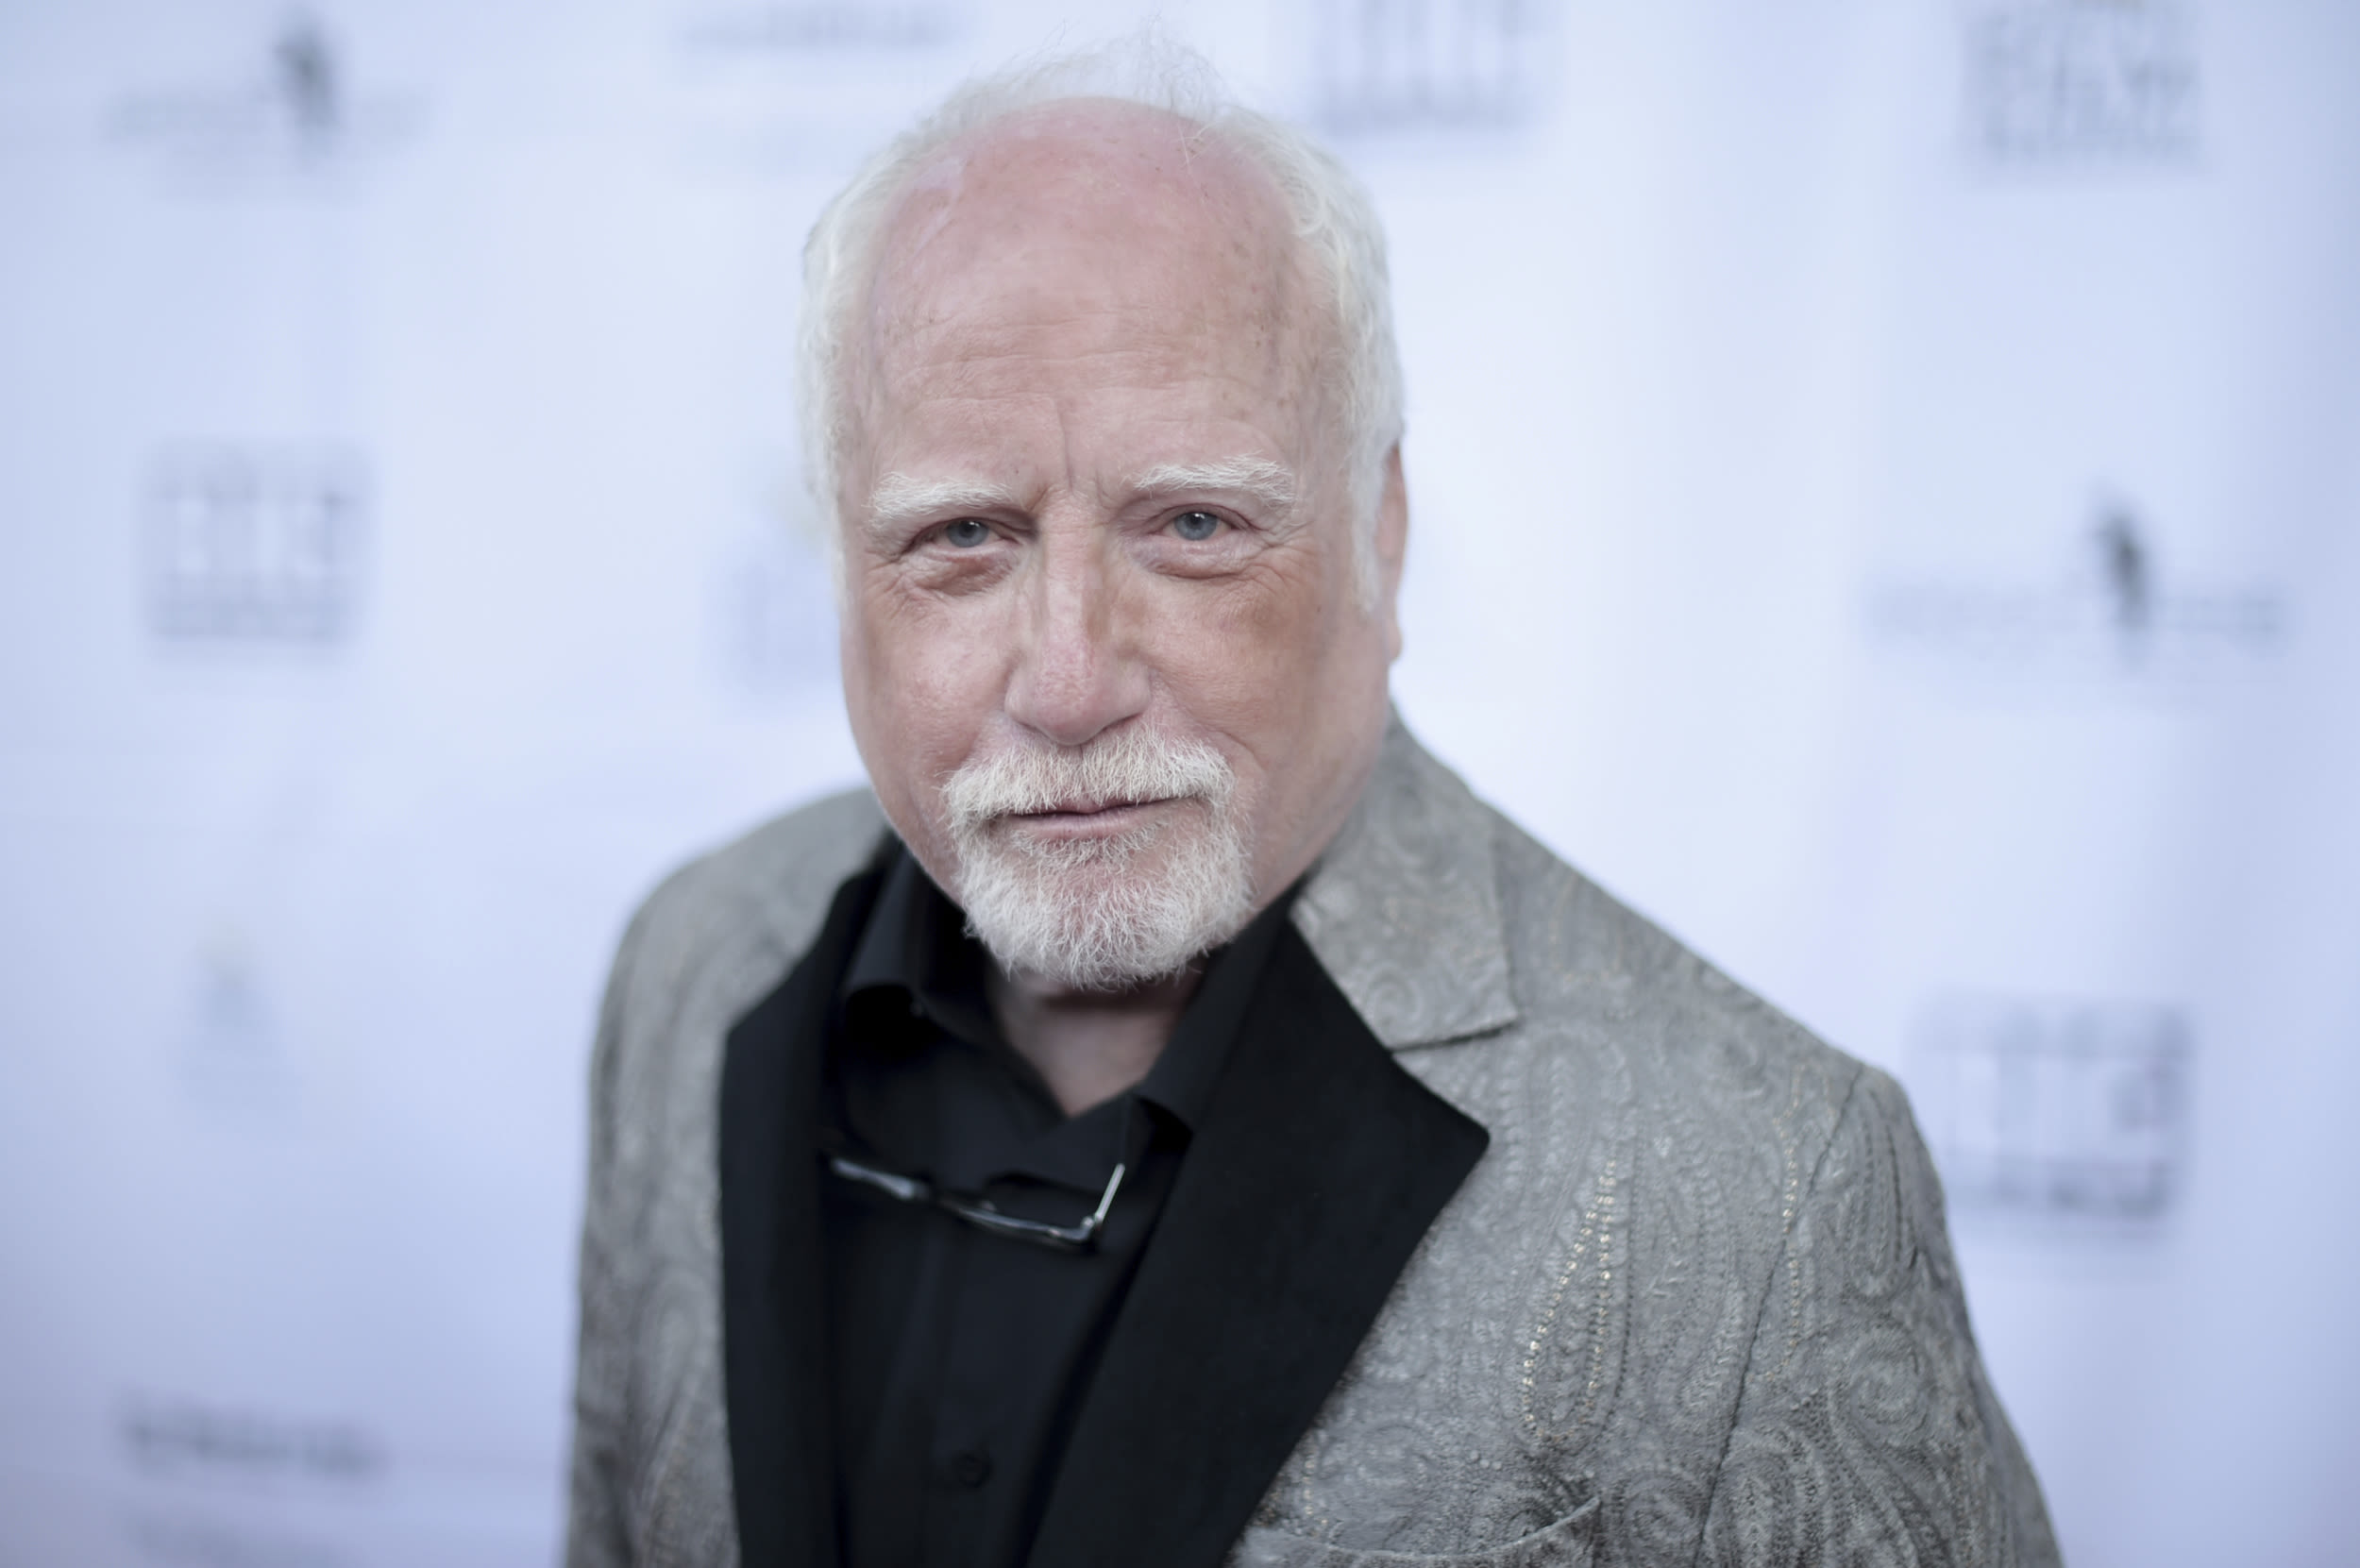 Richard Dreyfuss' son distances himself from latest rant, while theater director shares details